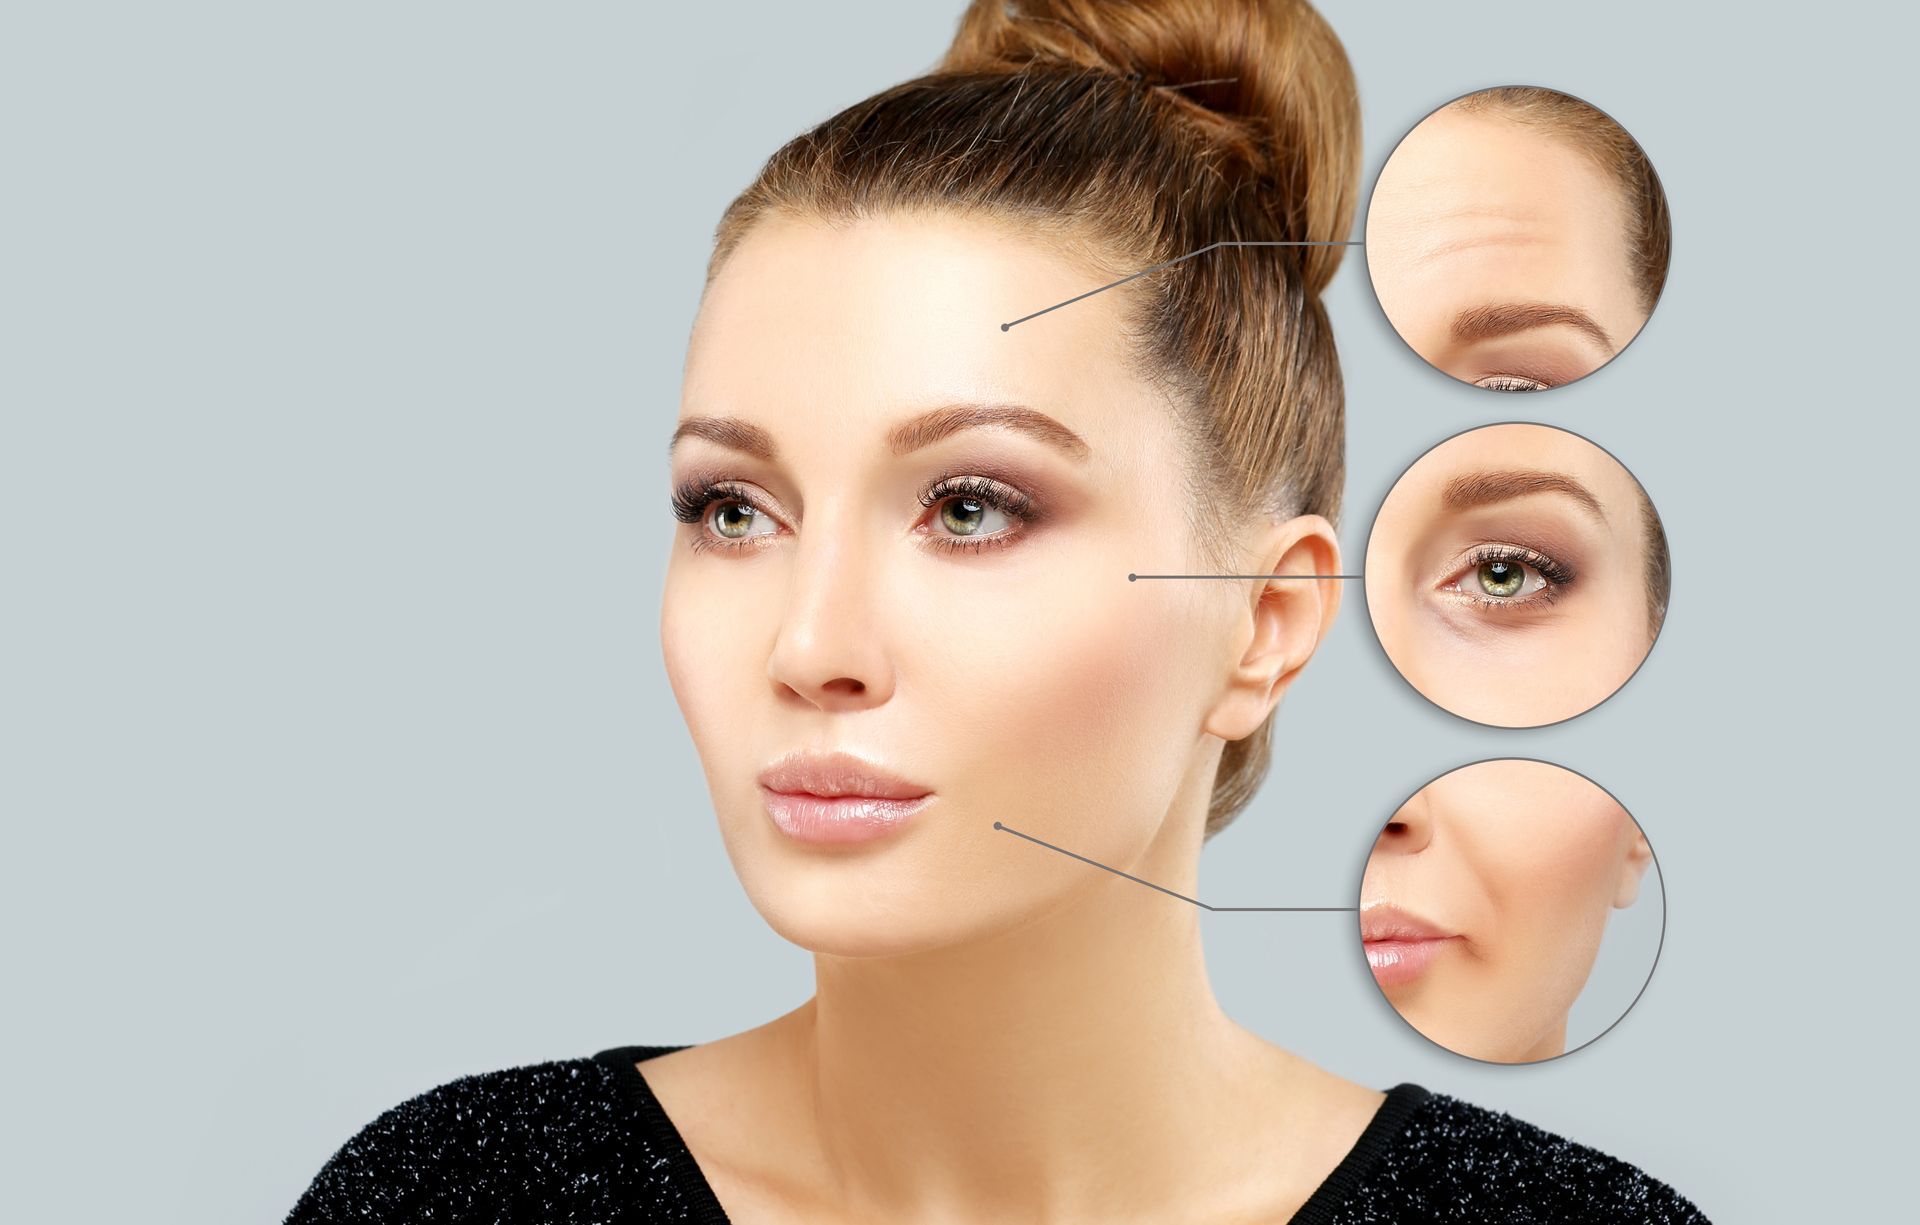 a woman 's face is shown highlighting areas for aesthetics treatments